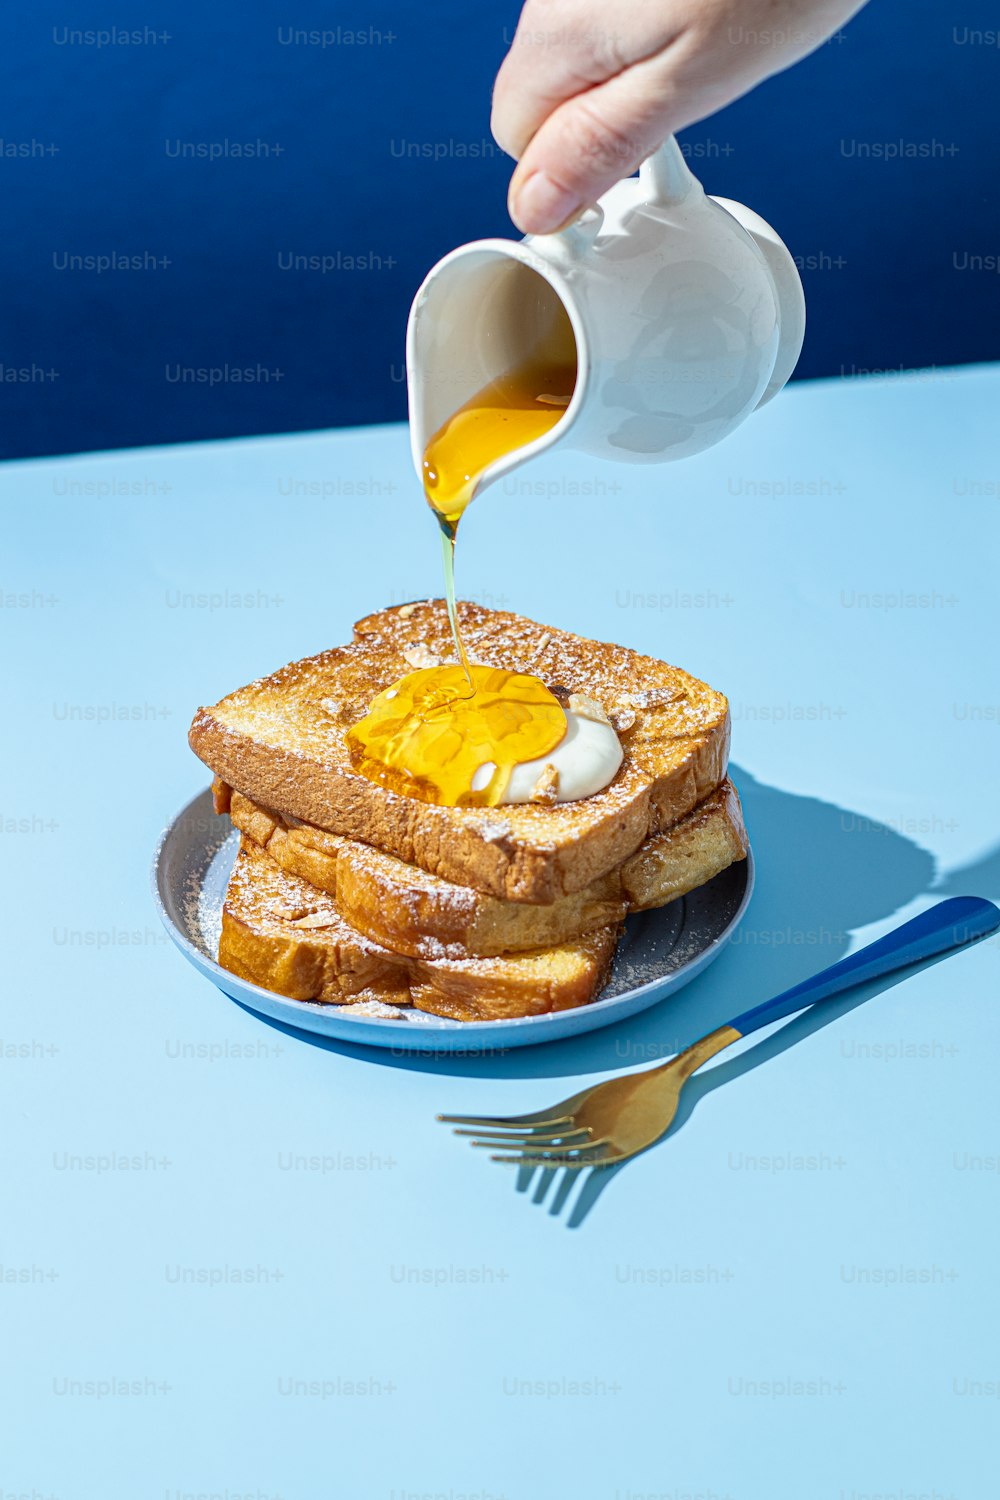 a person pouring syrup on a plate of french toast